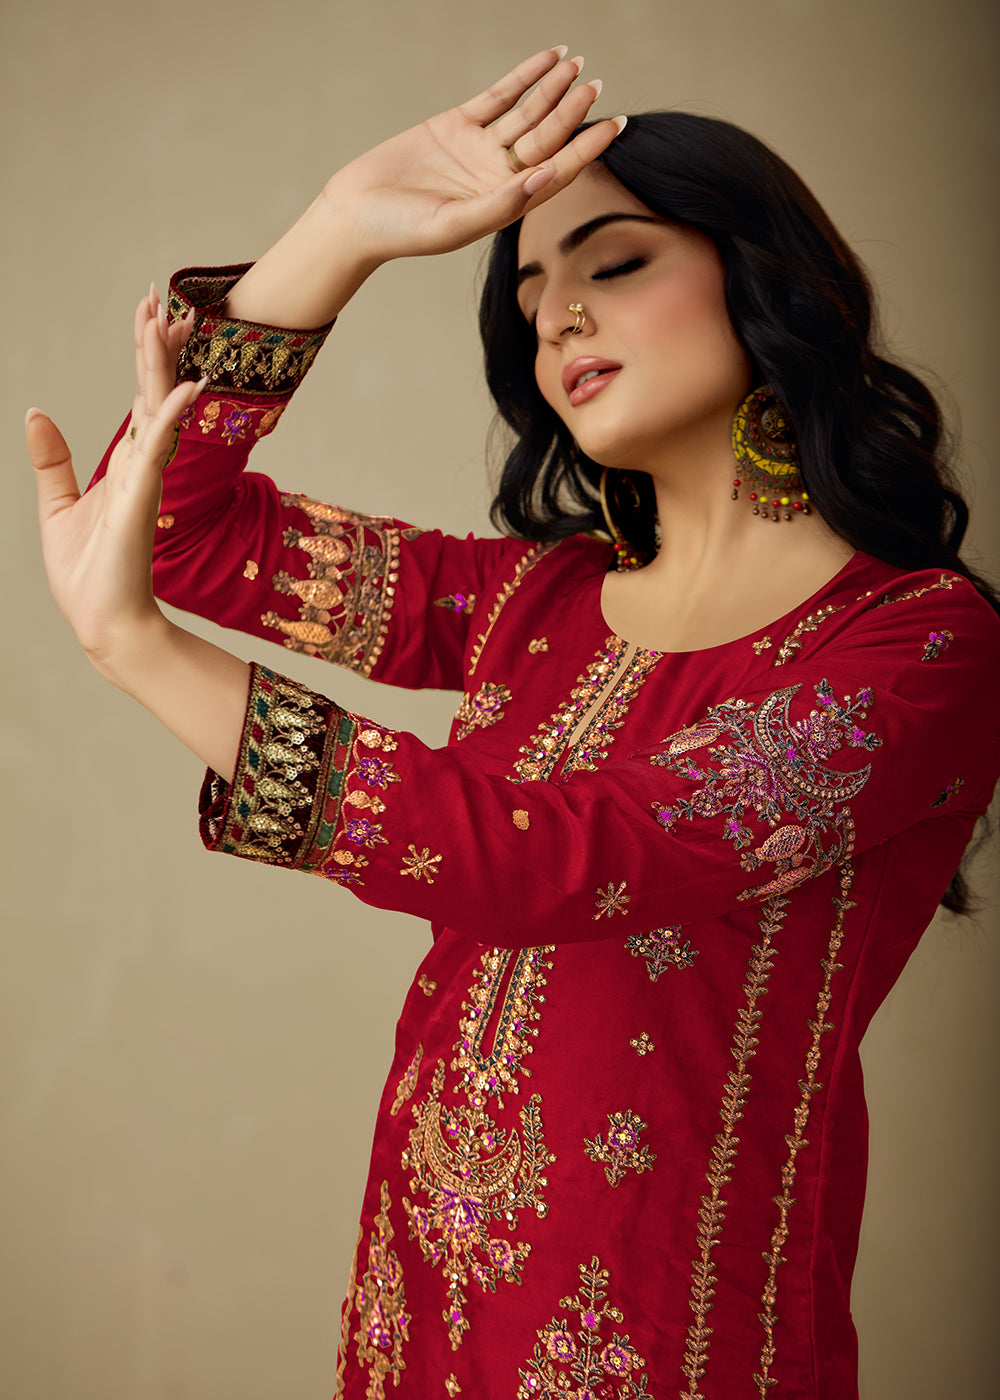 Buy Now Vivid Red Organza Embroidered Traditional Salwar Kameez Online in USA, UK, Canada, Germany, Australia & Worldwide at Empress Clothing